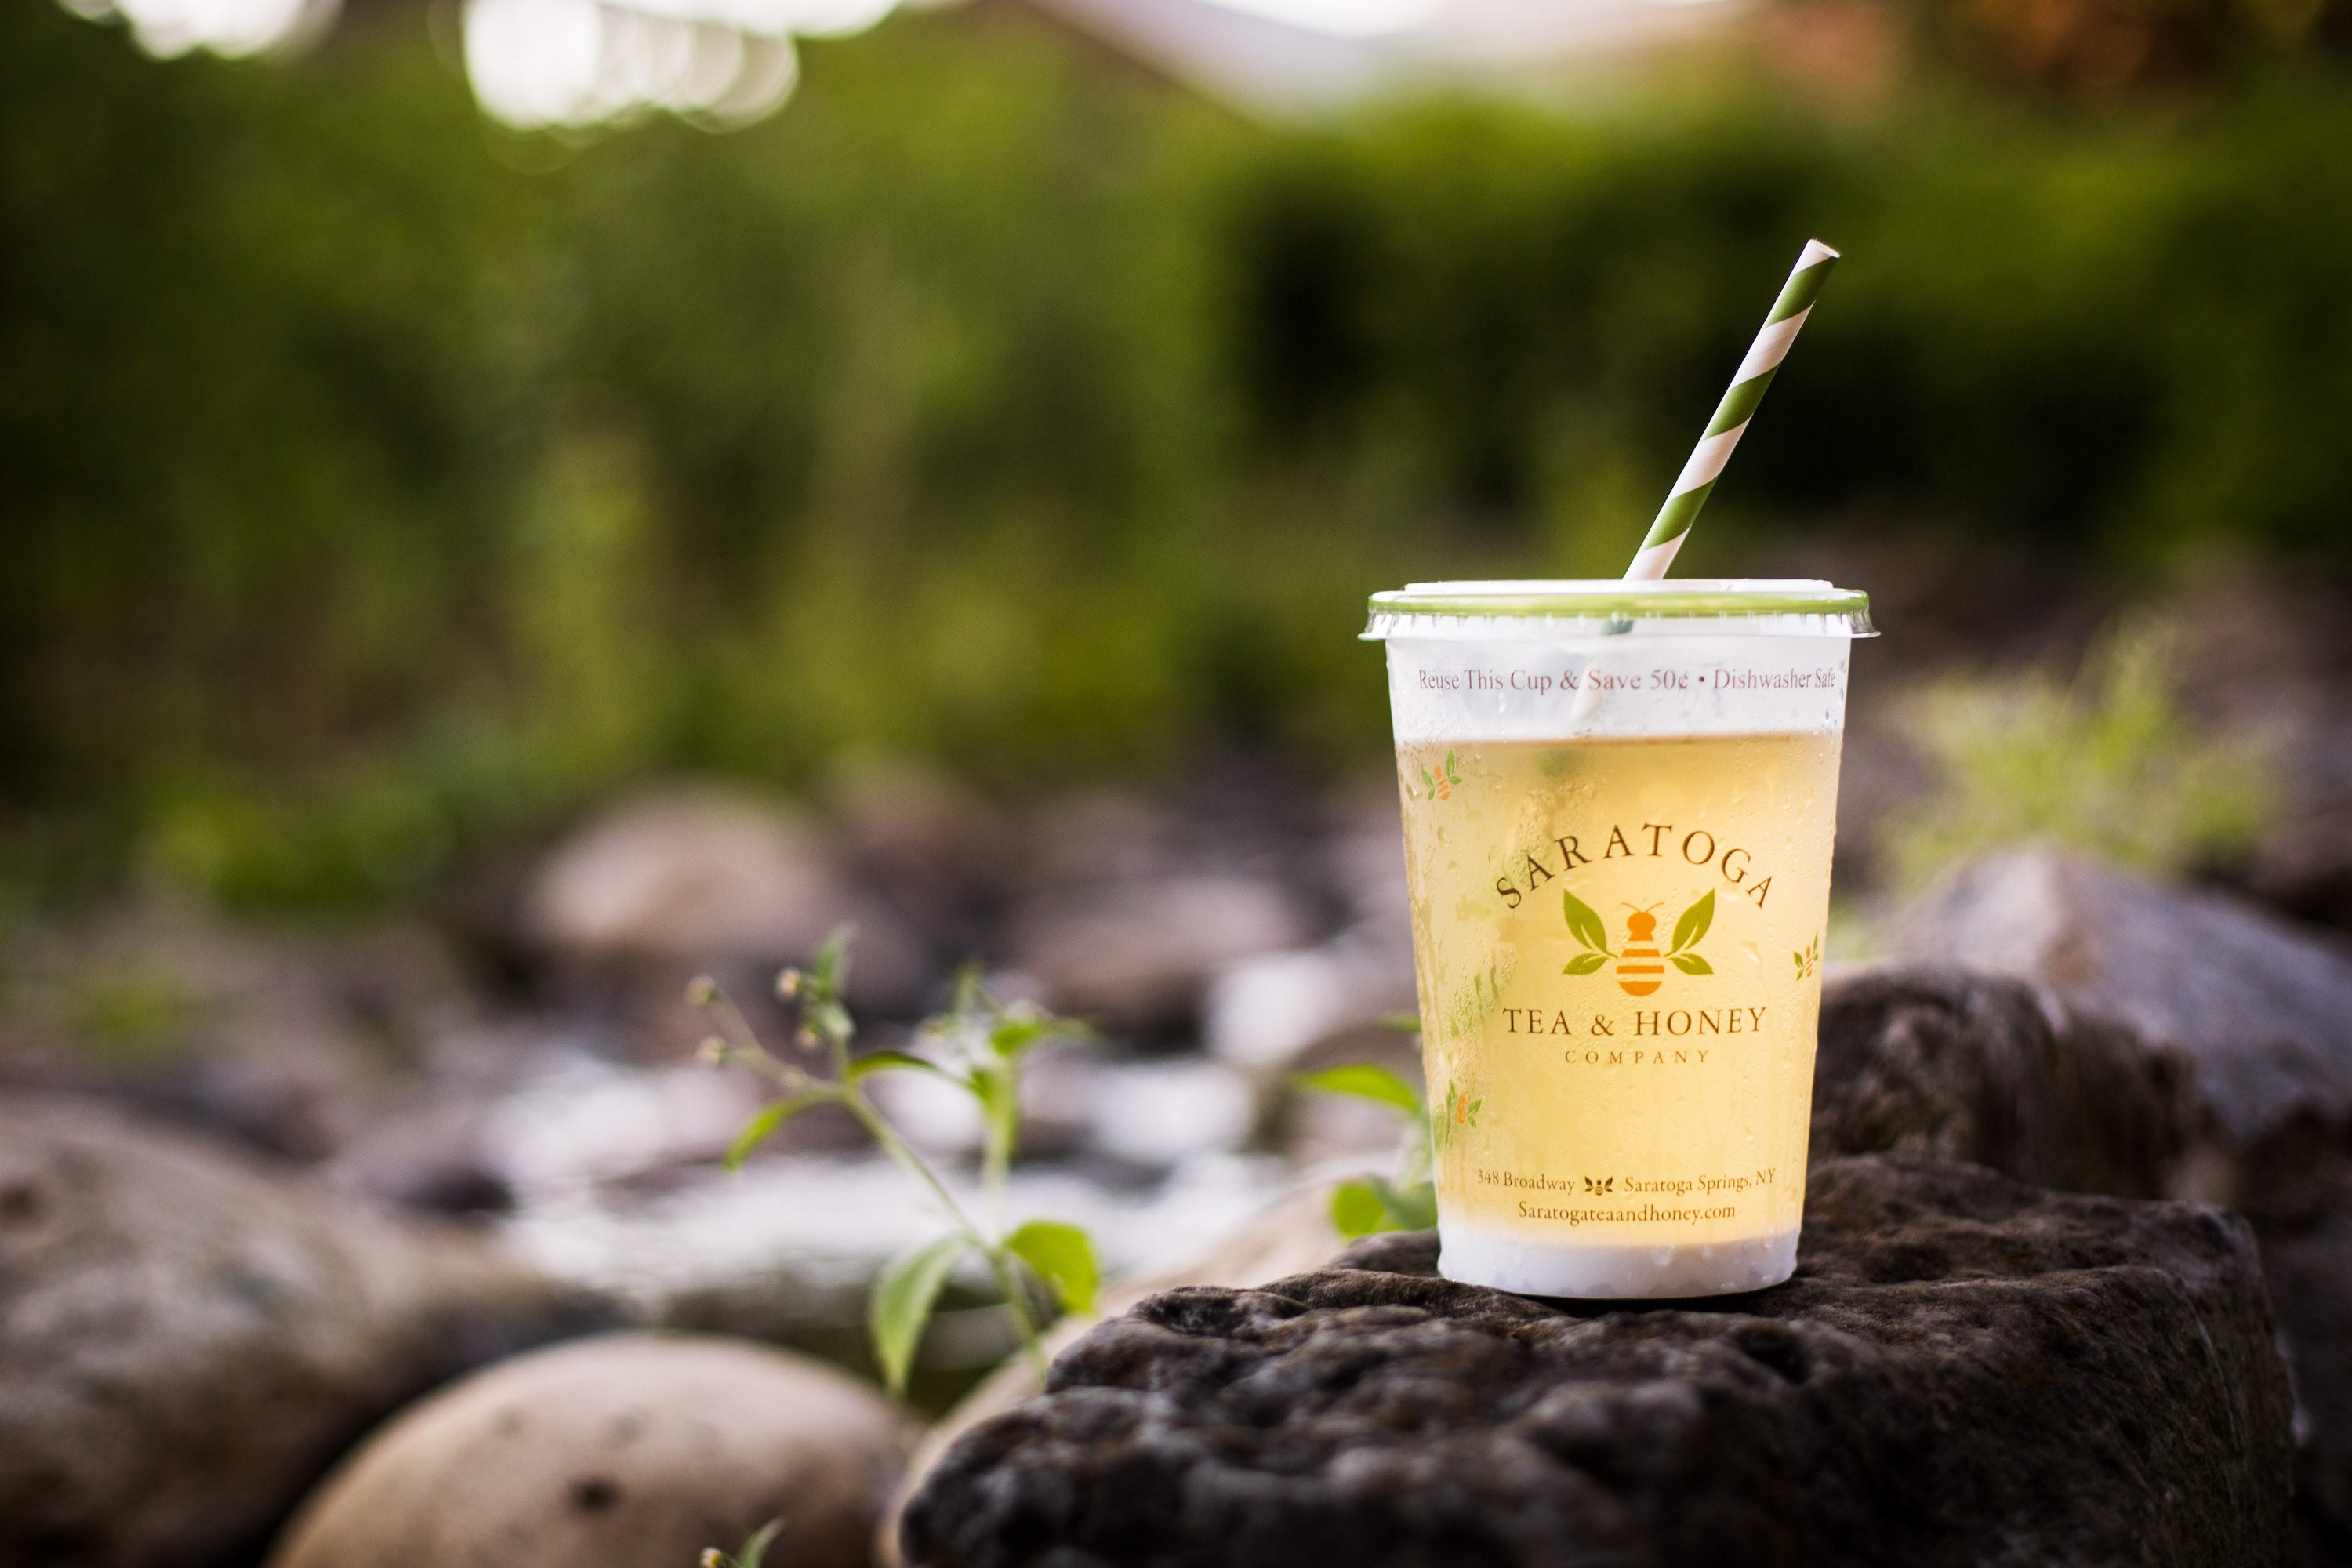 branded cup of Saratoga Tea & Honey Co. Iced Tea outside in nature